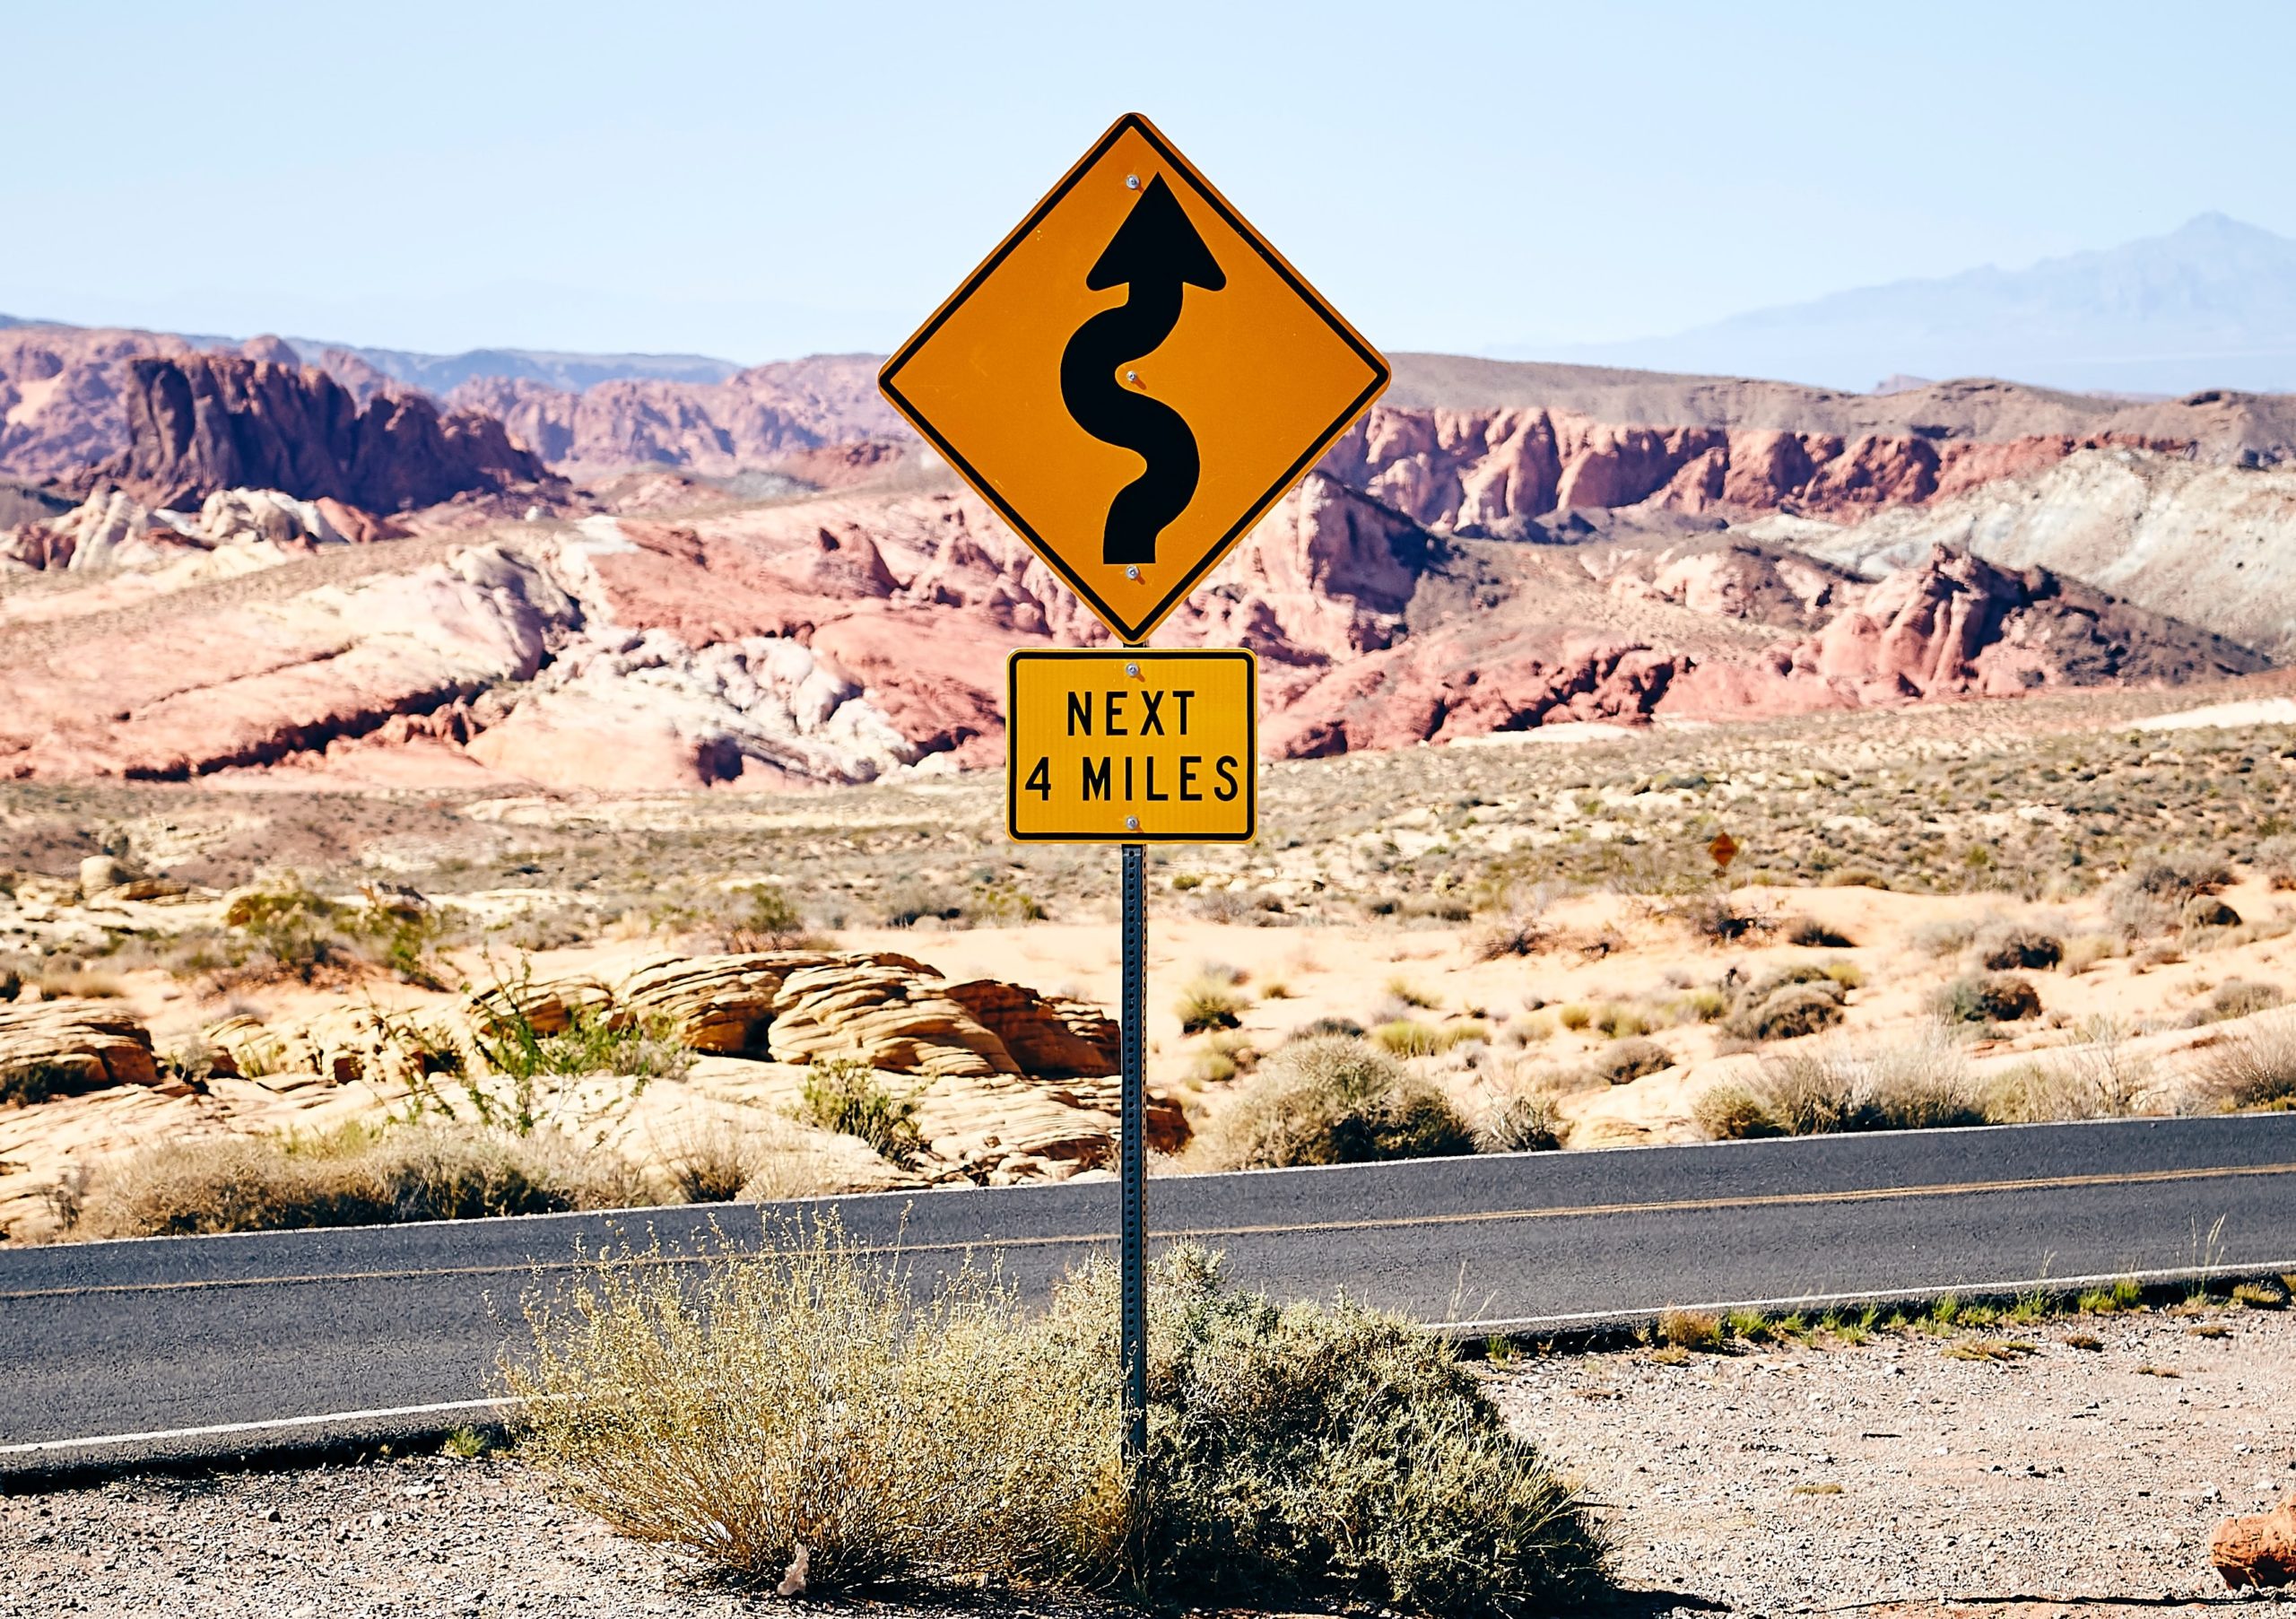 winding road, decisions ahead, consumer behavior is changing